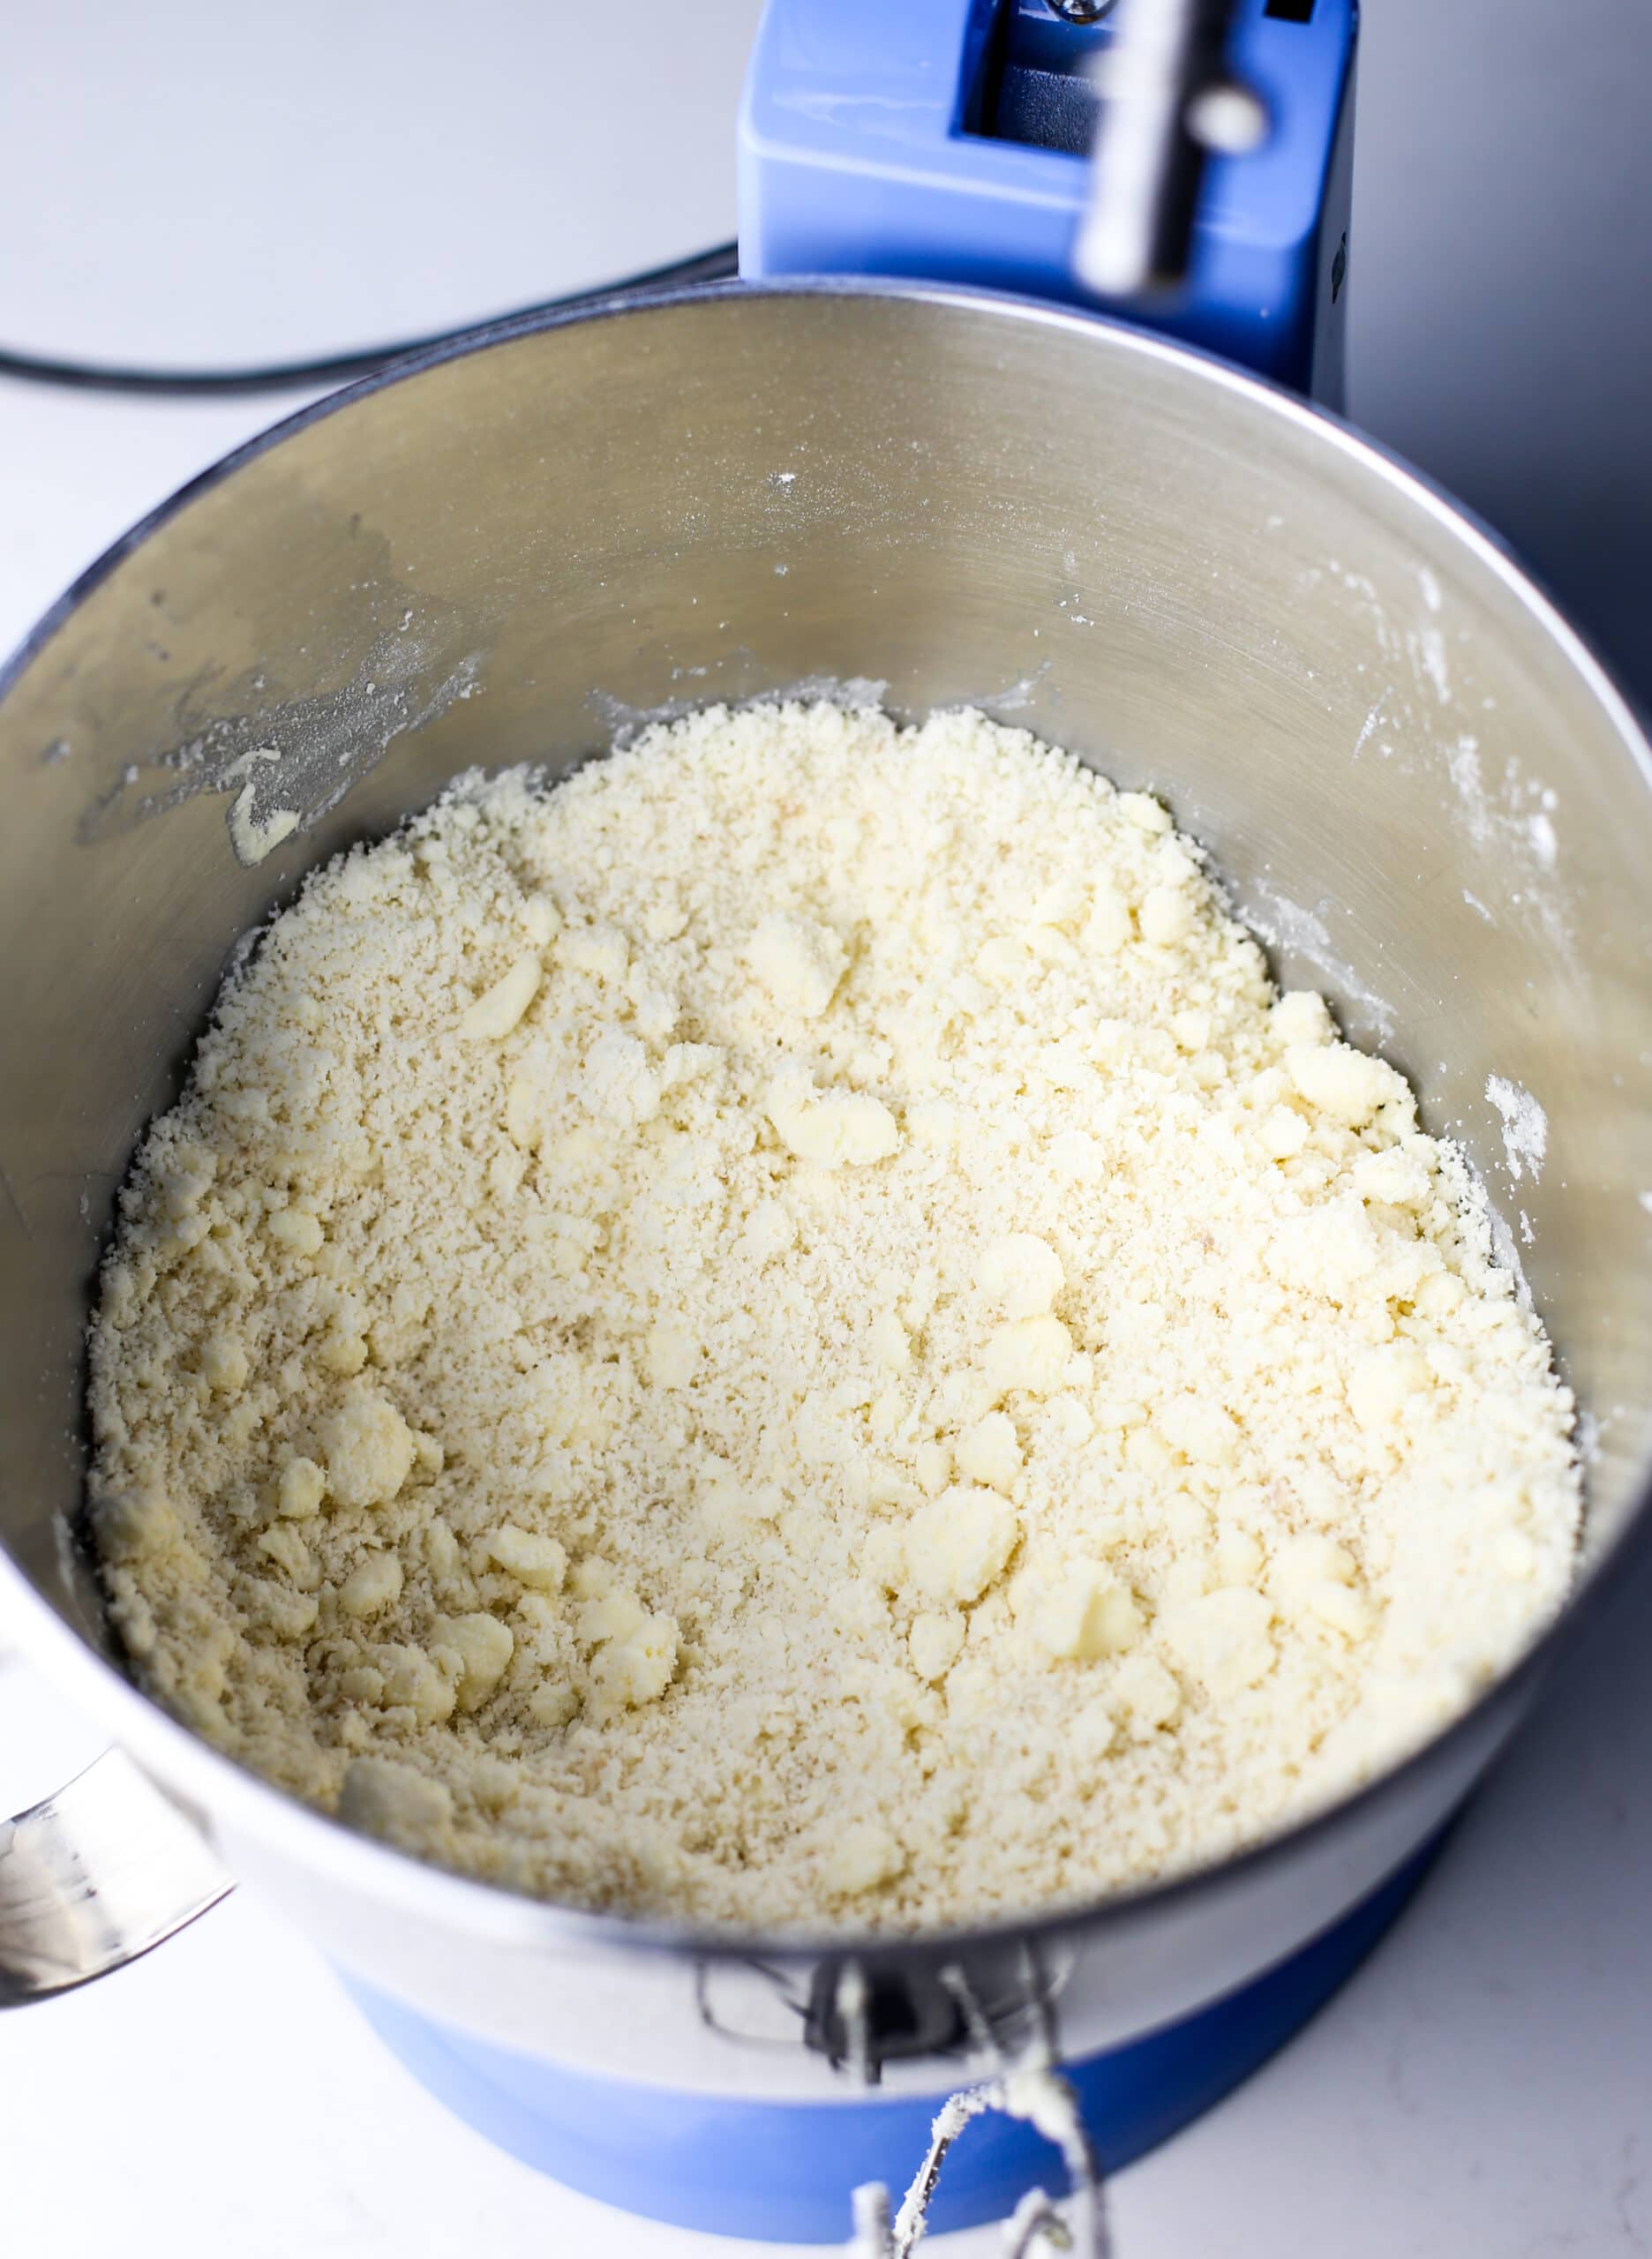 Condensed milk cookie ingredients partially combined in a mixing bowl.